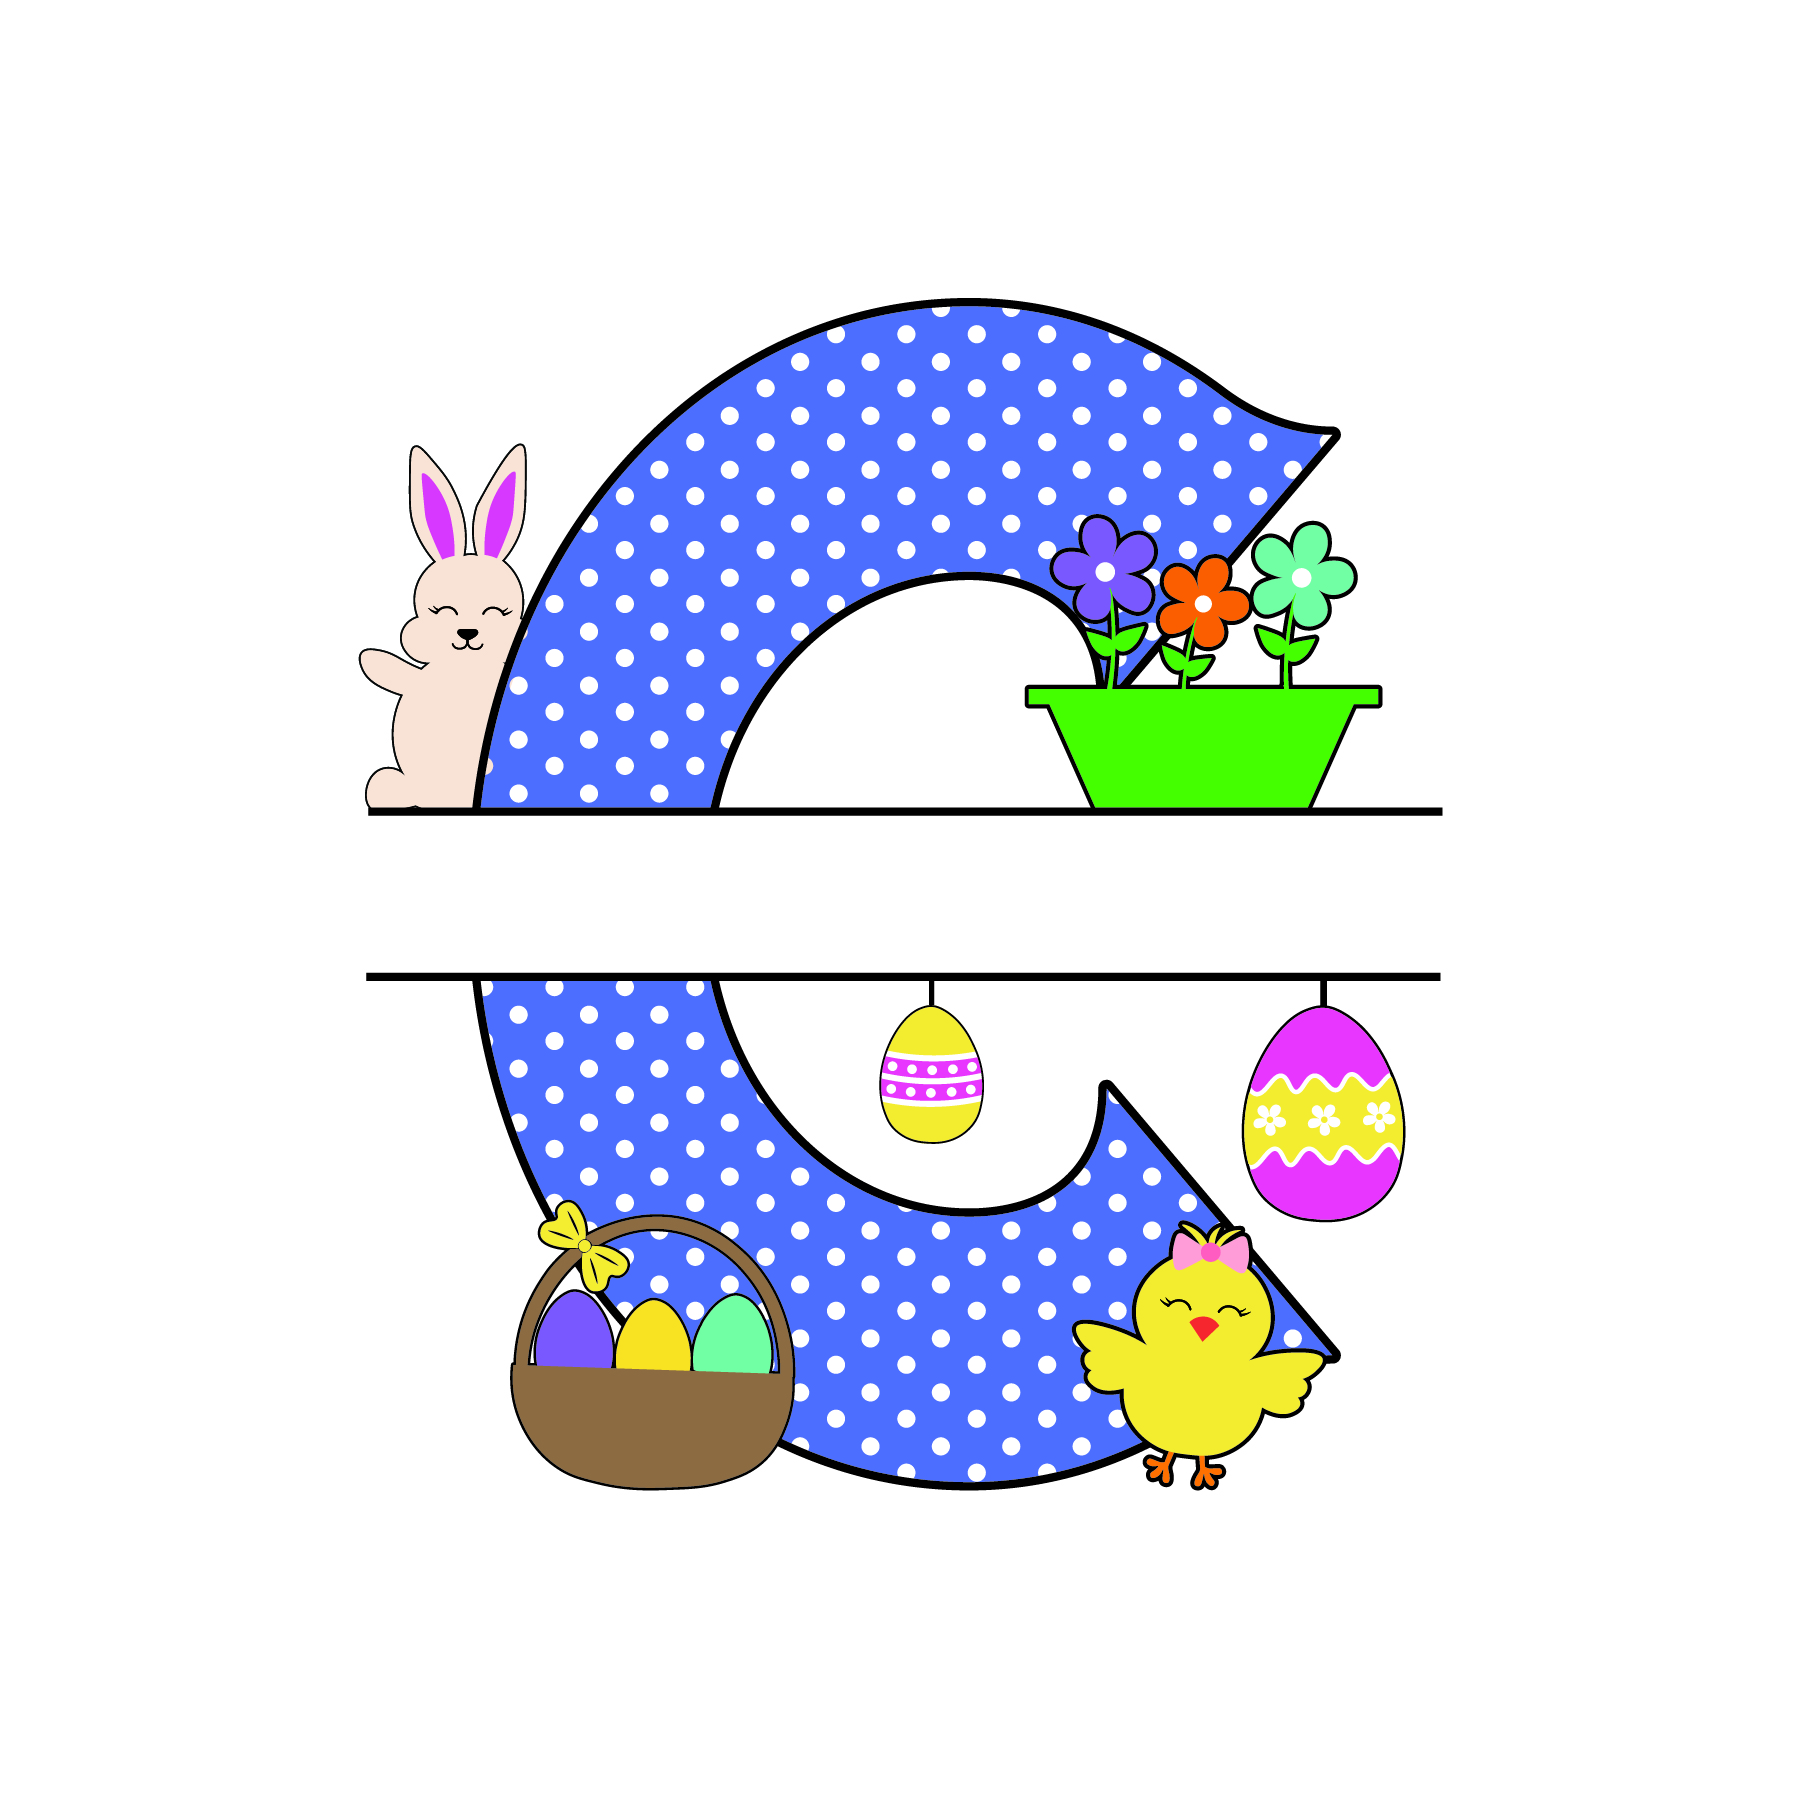 c letter free easter monogram bunny egg basket chicken clipart alphabet letter split customize or personalize stencil template to print or download vector svg laser vinyl circuit silhouette.